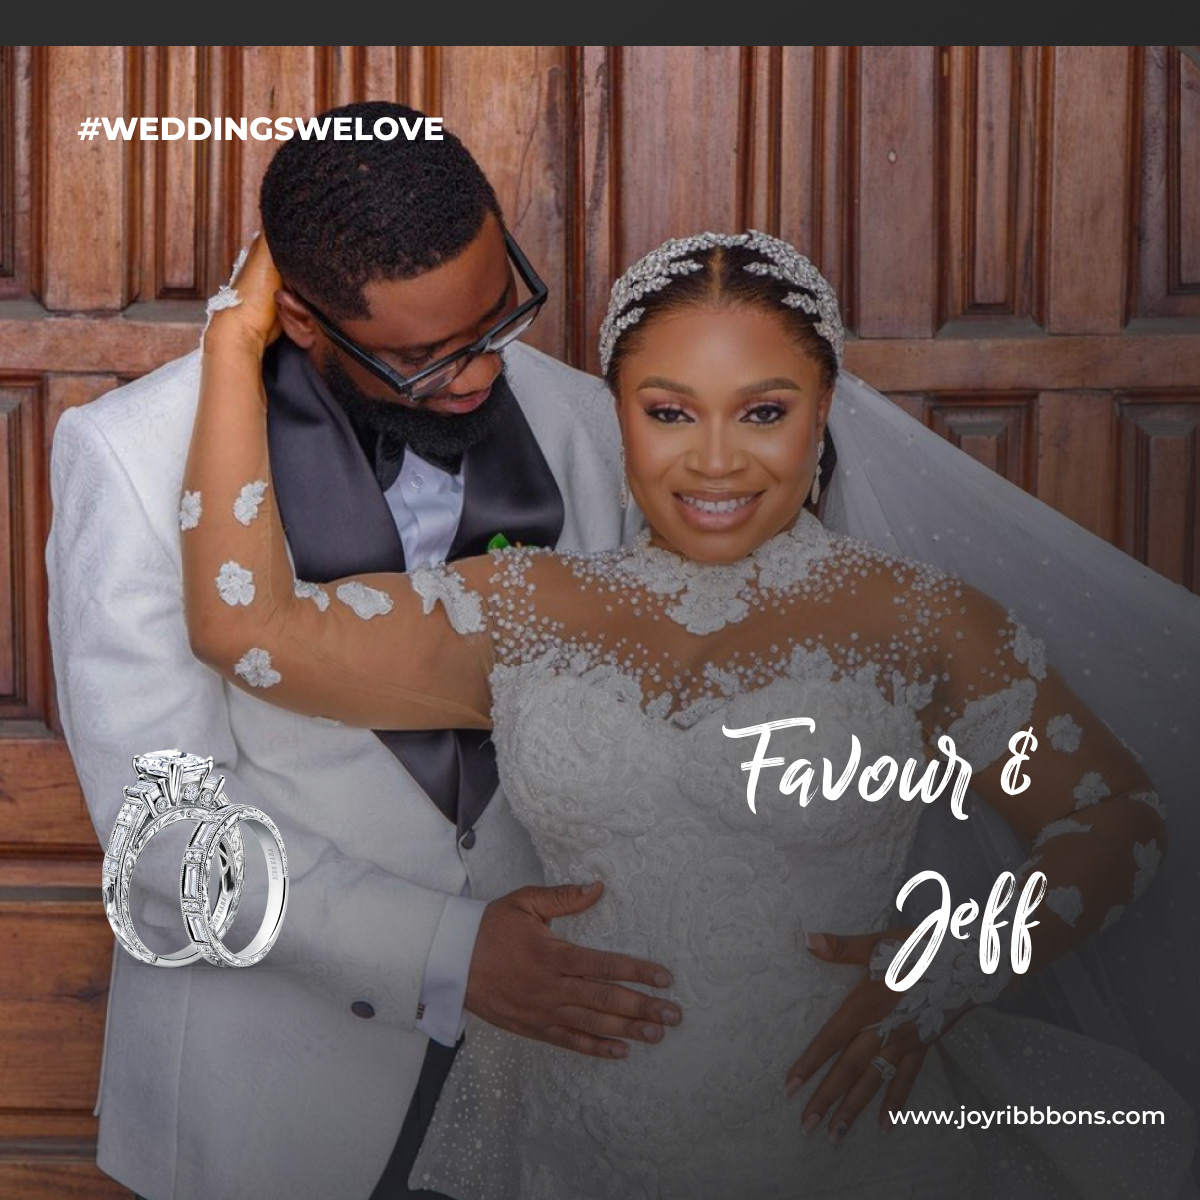 JoyRibbons is the home of all things weddings in Nigeria. We provide an easy-to-use wedding and gift registry
      for about to wed couples. Enjoy some of the Weddings We Love at JoyRibbons with these series